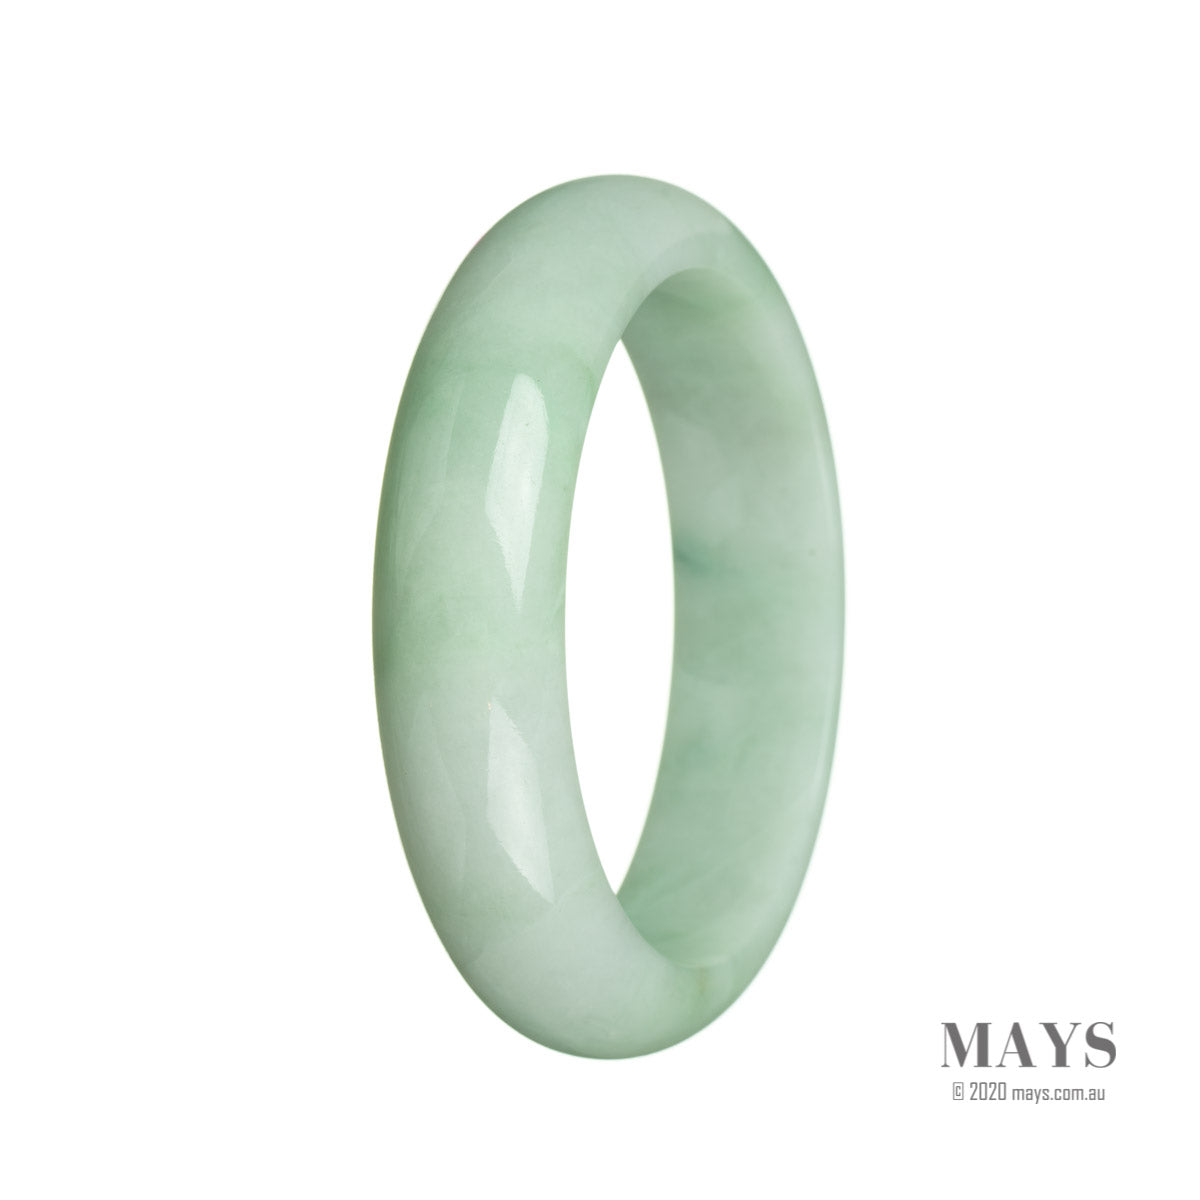 An exquisite light green jadeite jade bangle bracelet with a half moon shape, measuring 62mm in size. Handcrafted with authentic Grade A jade, this bracelet from MAYS Jewelry is a stunning and timeless piece.